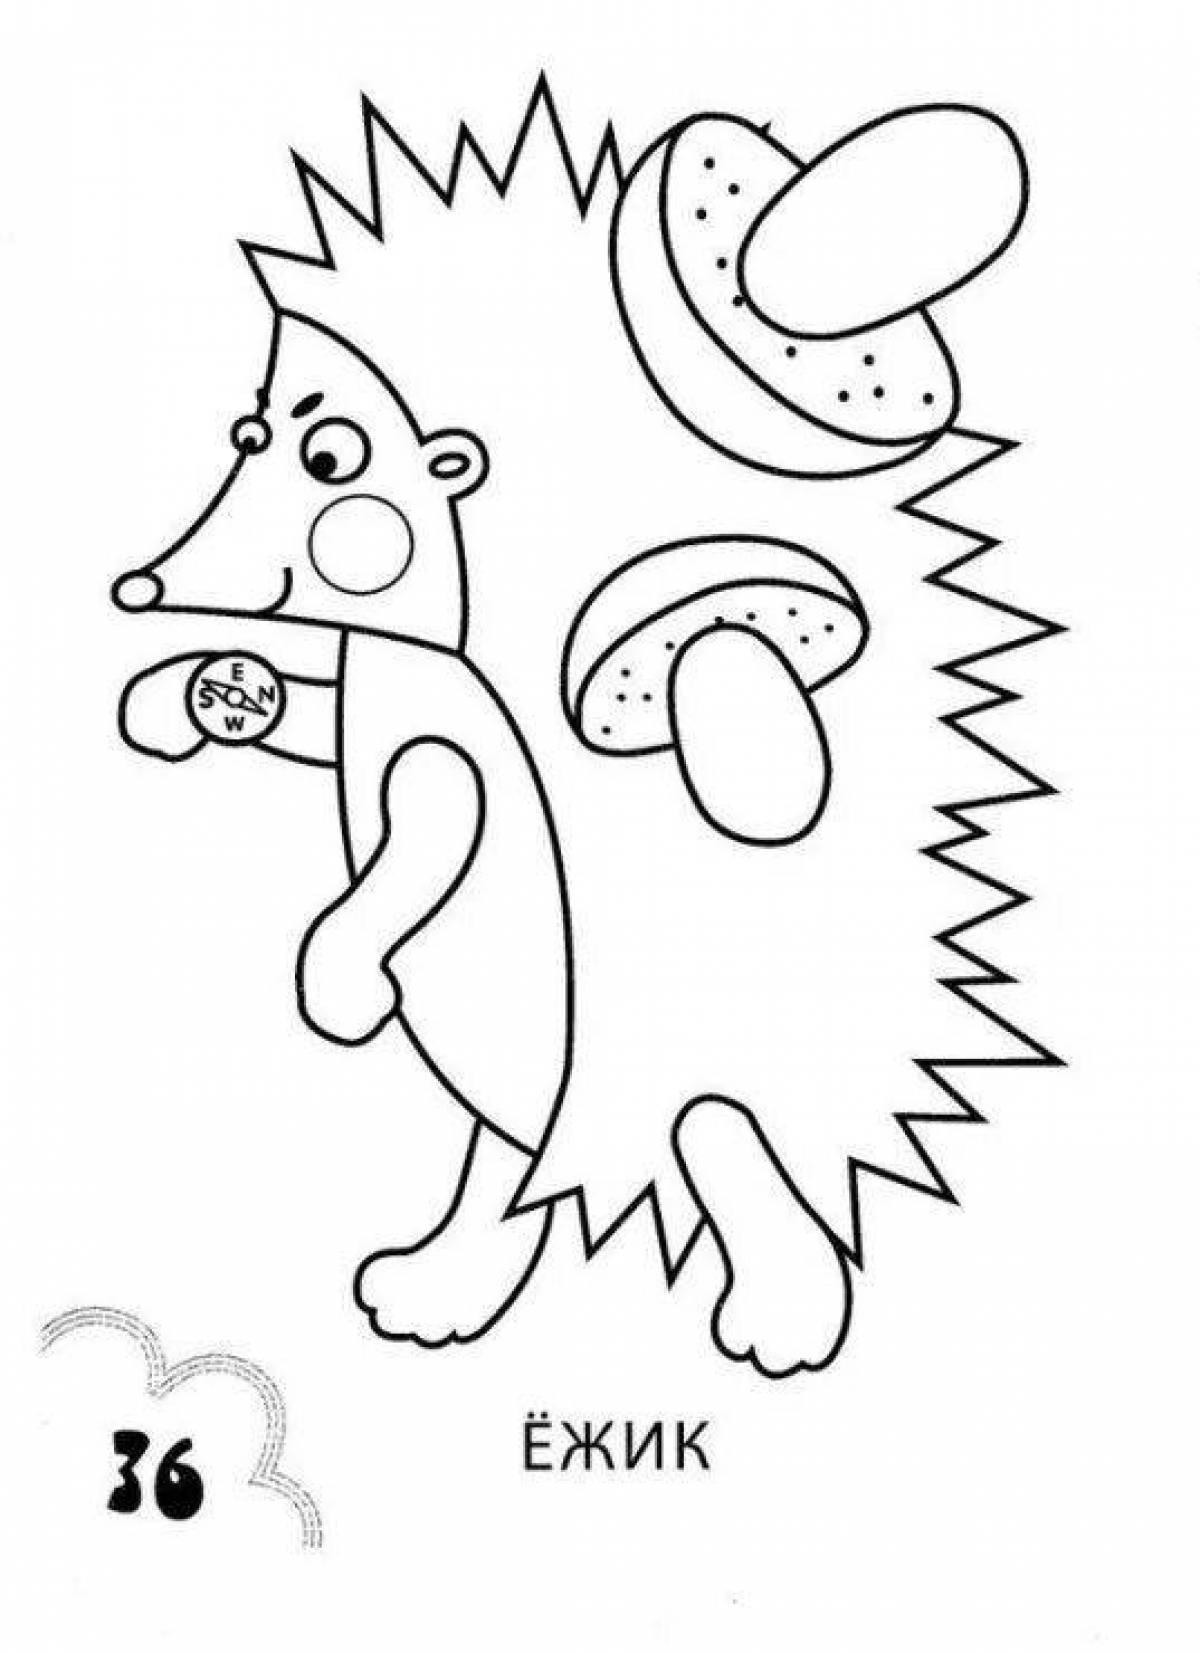 Gorgeous hedgehog coloring book for kids